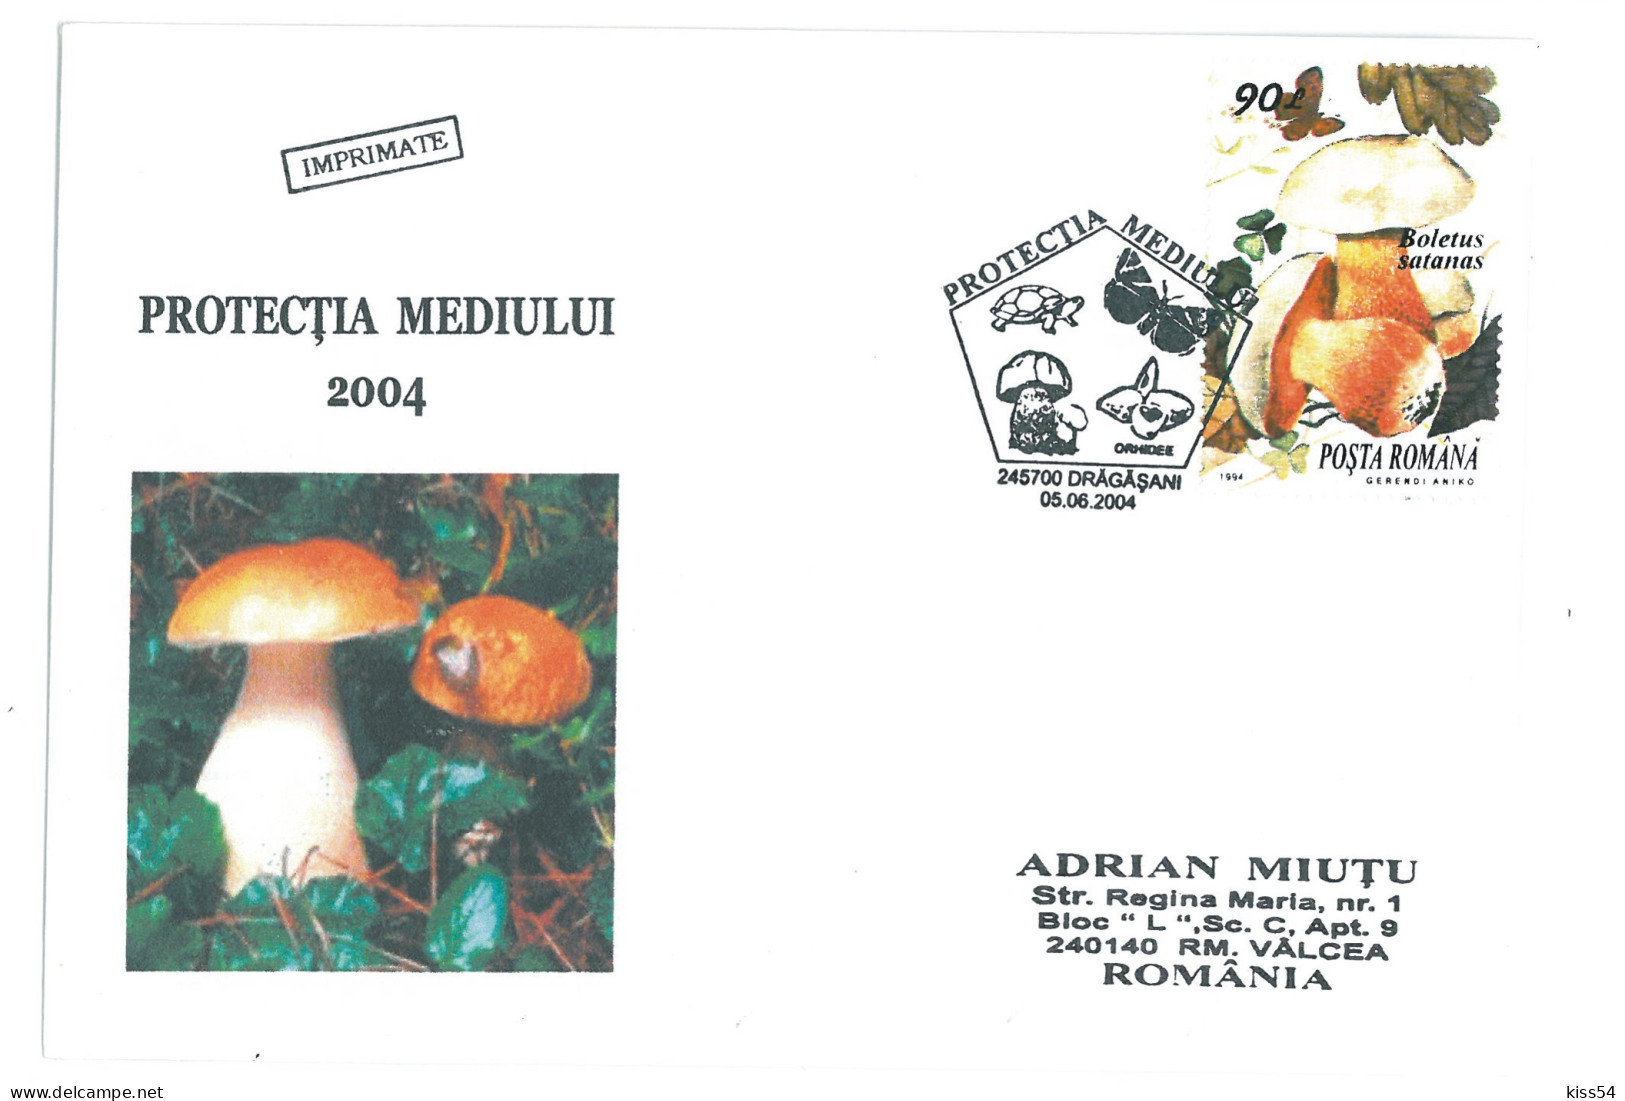 COV 997 - 3158 MUSHROOMS, Romania - Cover - Used - 2004 - Covers & Documents